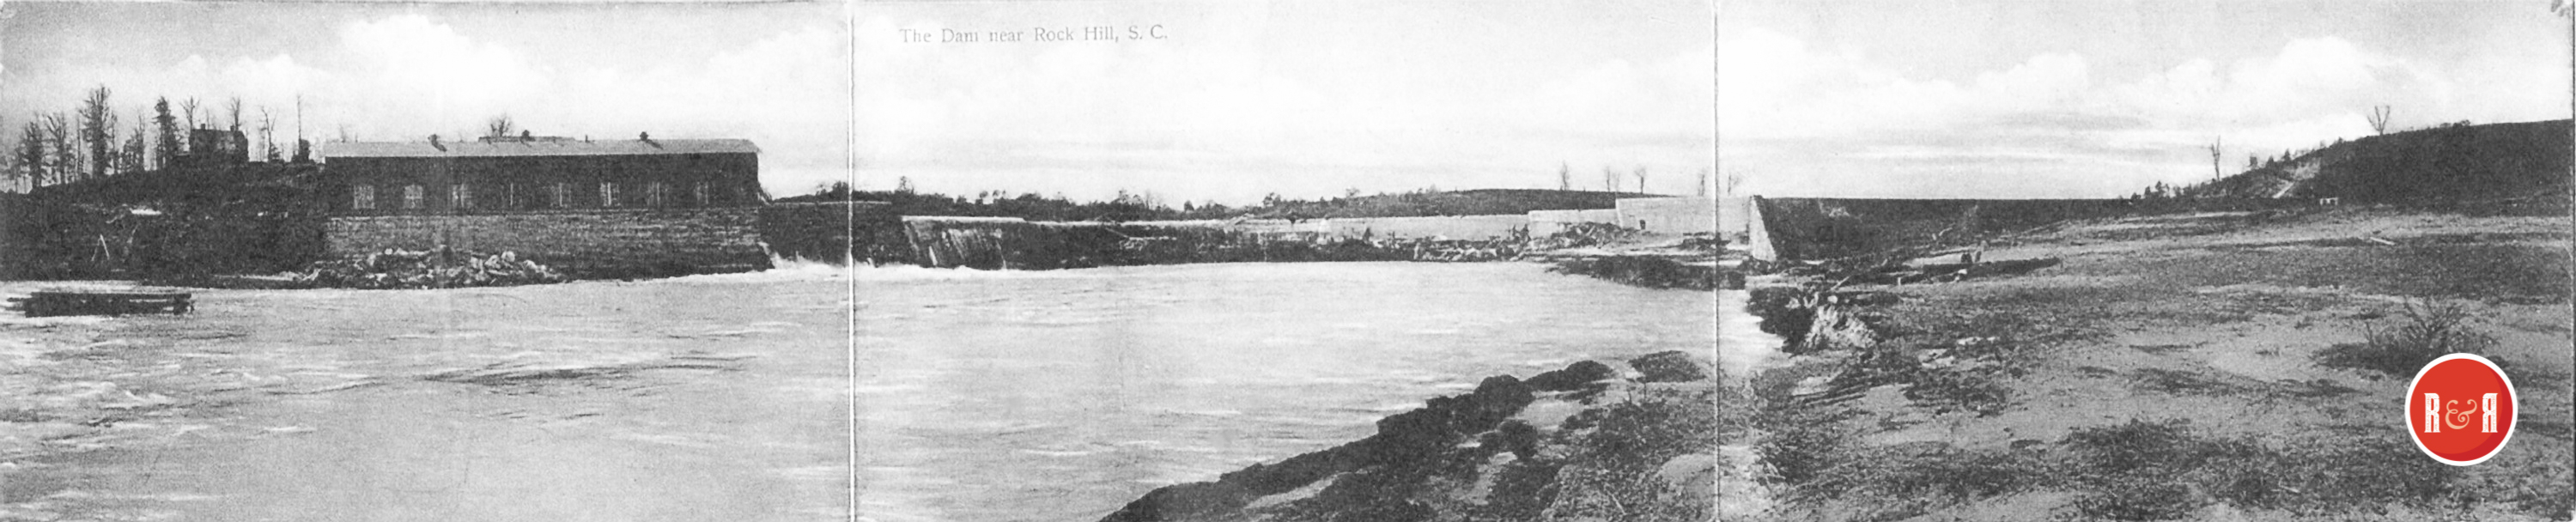 WIDE VIEW OF THE LAKE WYLIE DAM